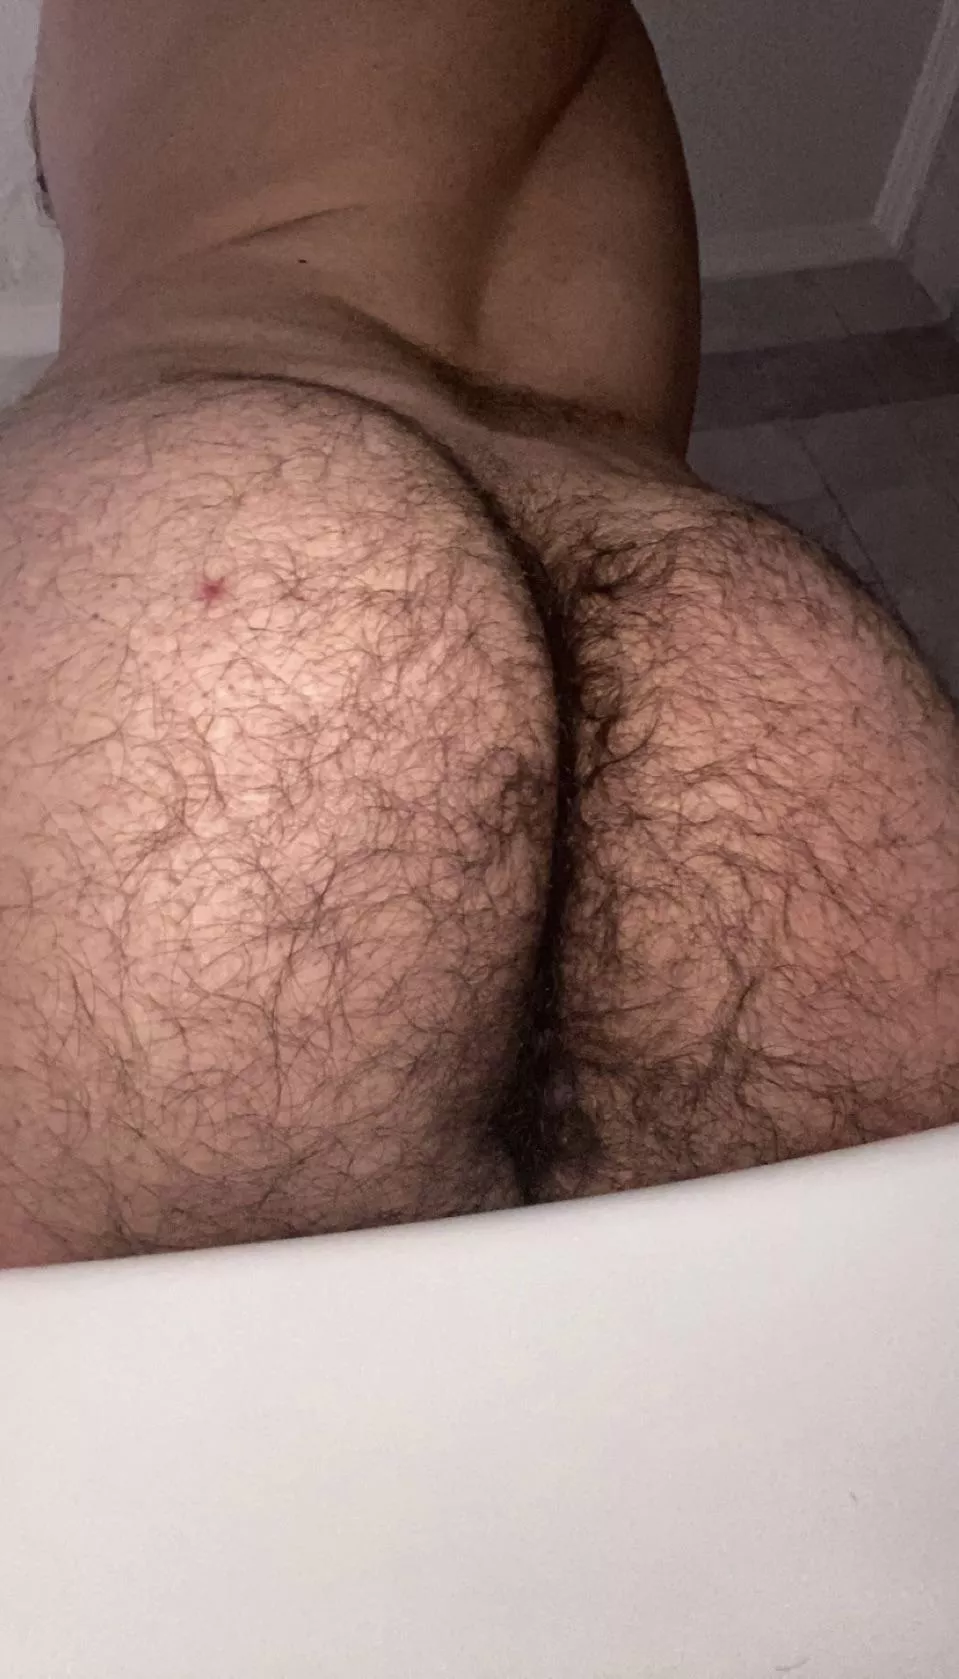 25m Pms Open Nudes Hairymanass Nude Pics Org